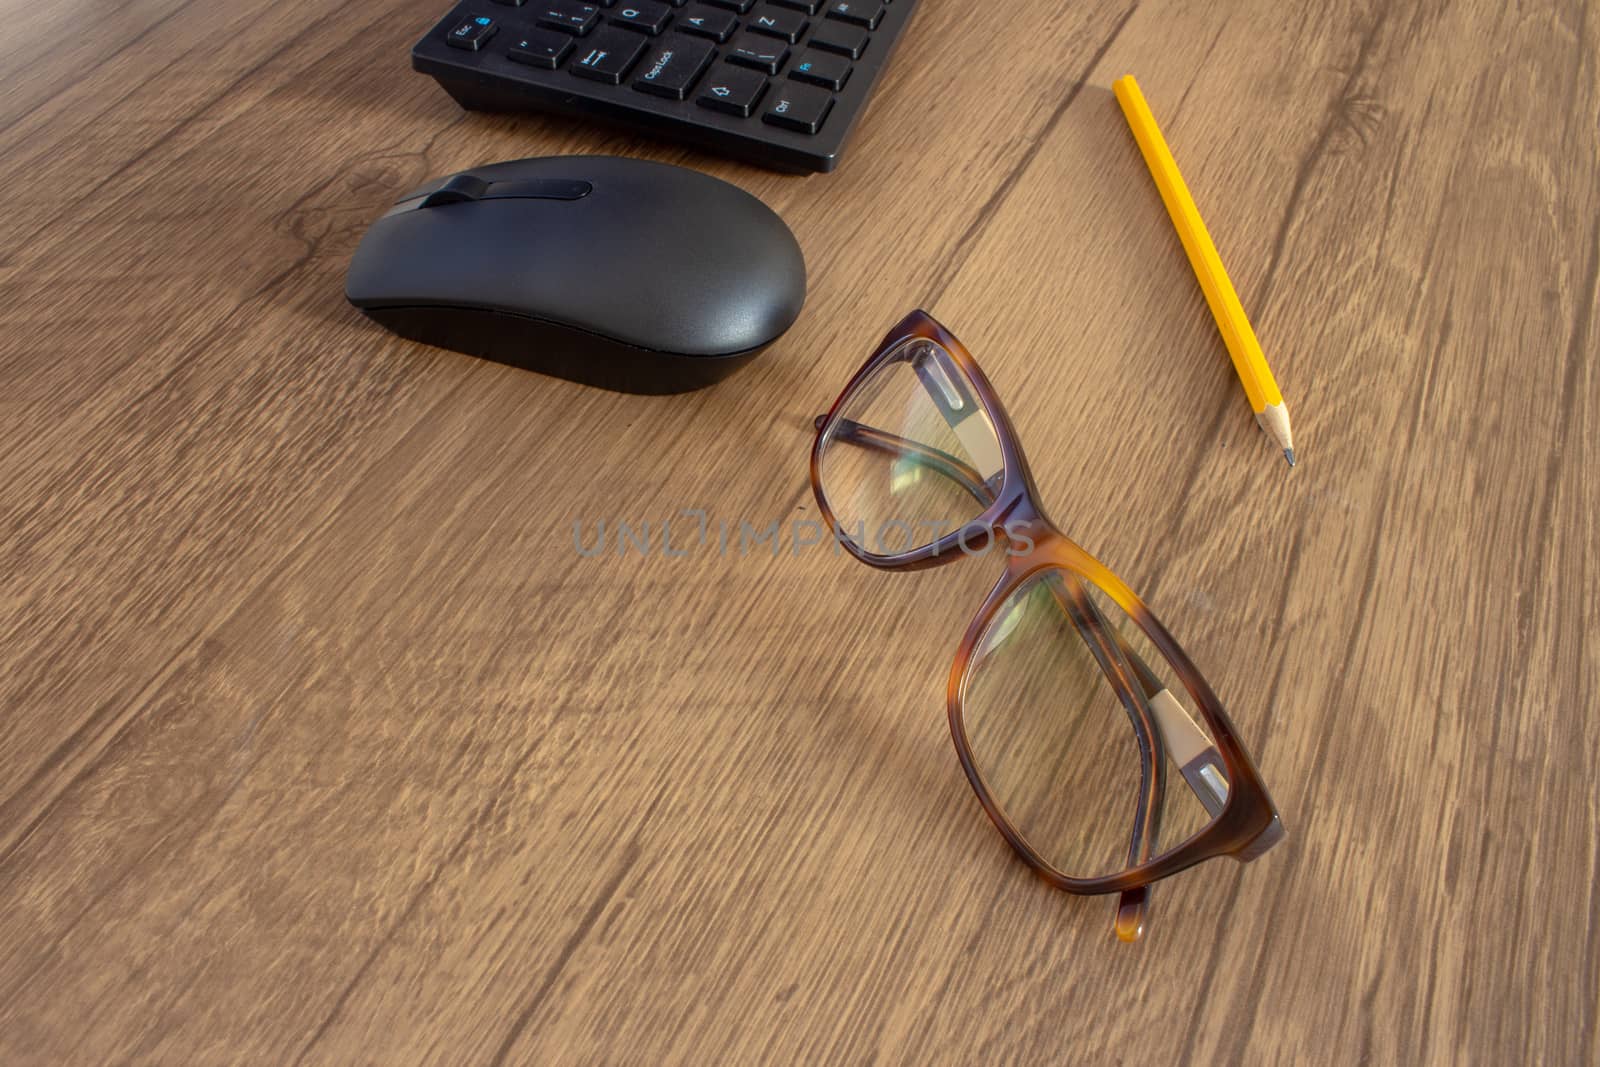 Par of glasses next to a pencil, a mouse and keyboard on top of a wooden desk